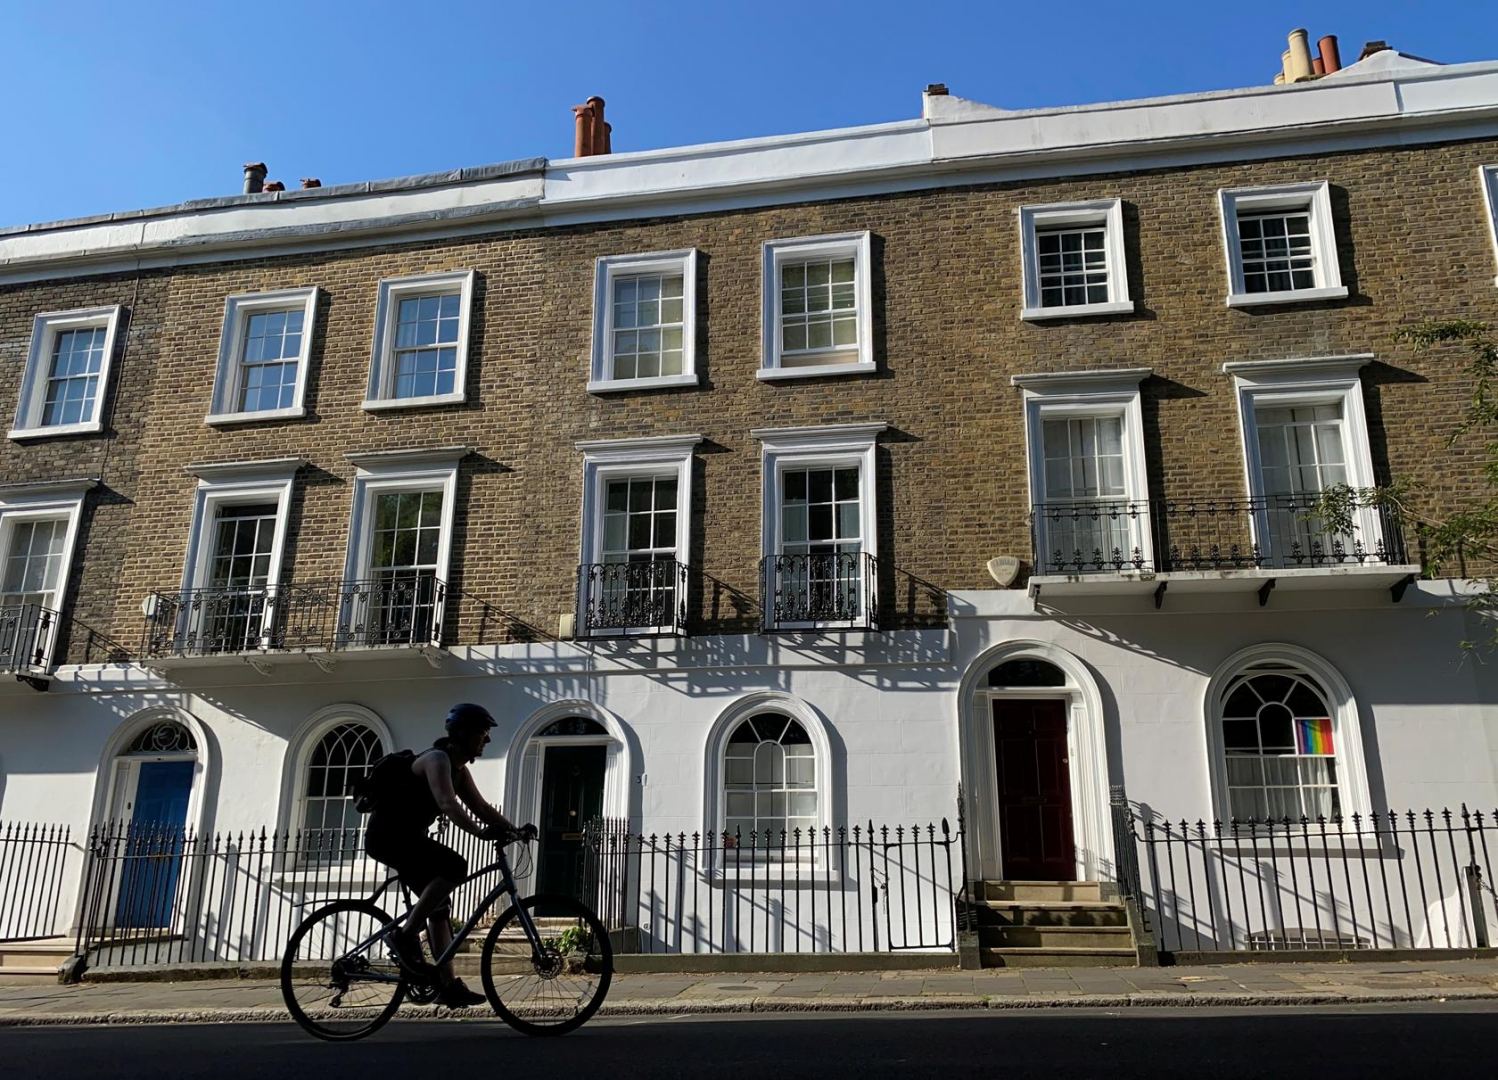 UK house prices fall for first time since 2012